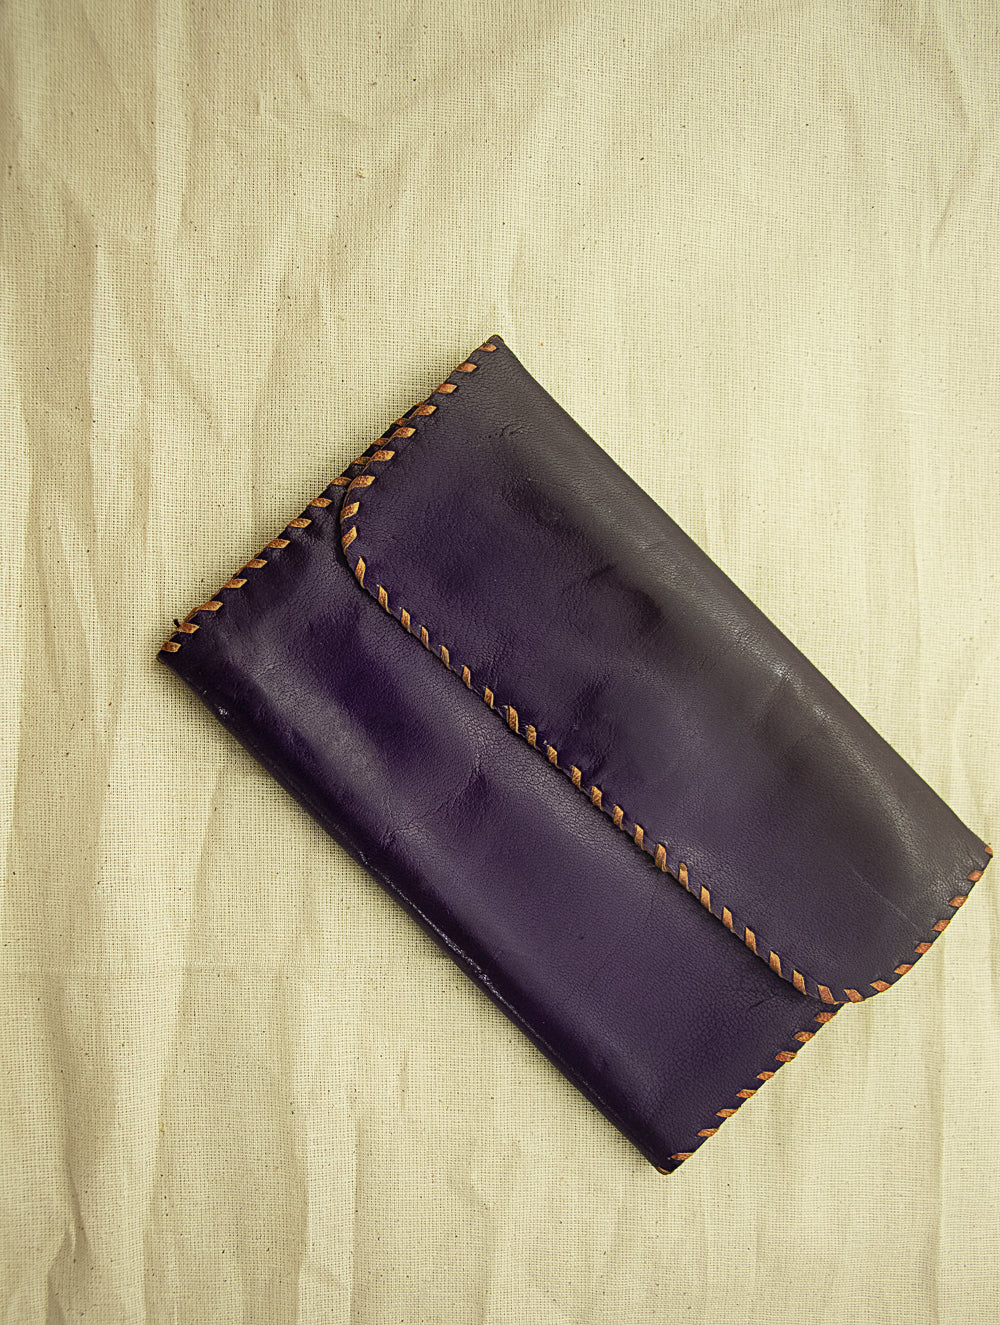 Load image into Gallery viewer, Handcrafted Leather Clutch / Wallet with Hand Stitch Detail - The India Craft House 